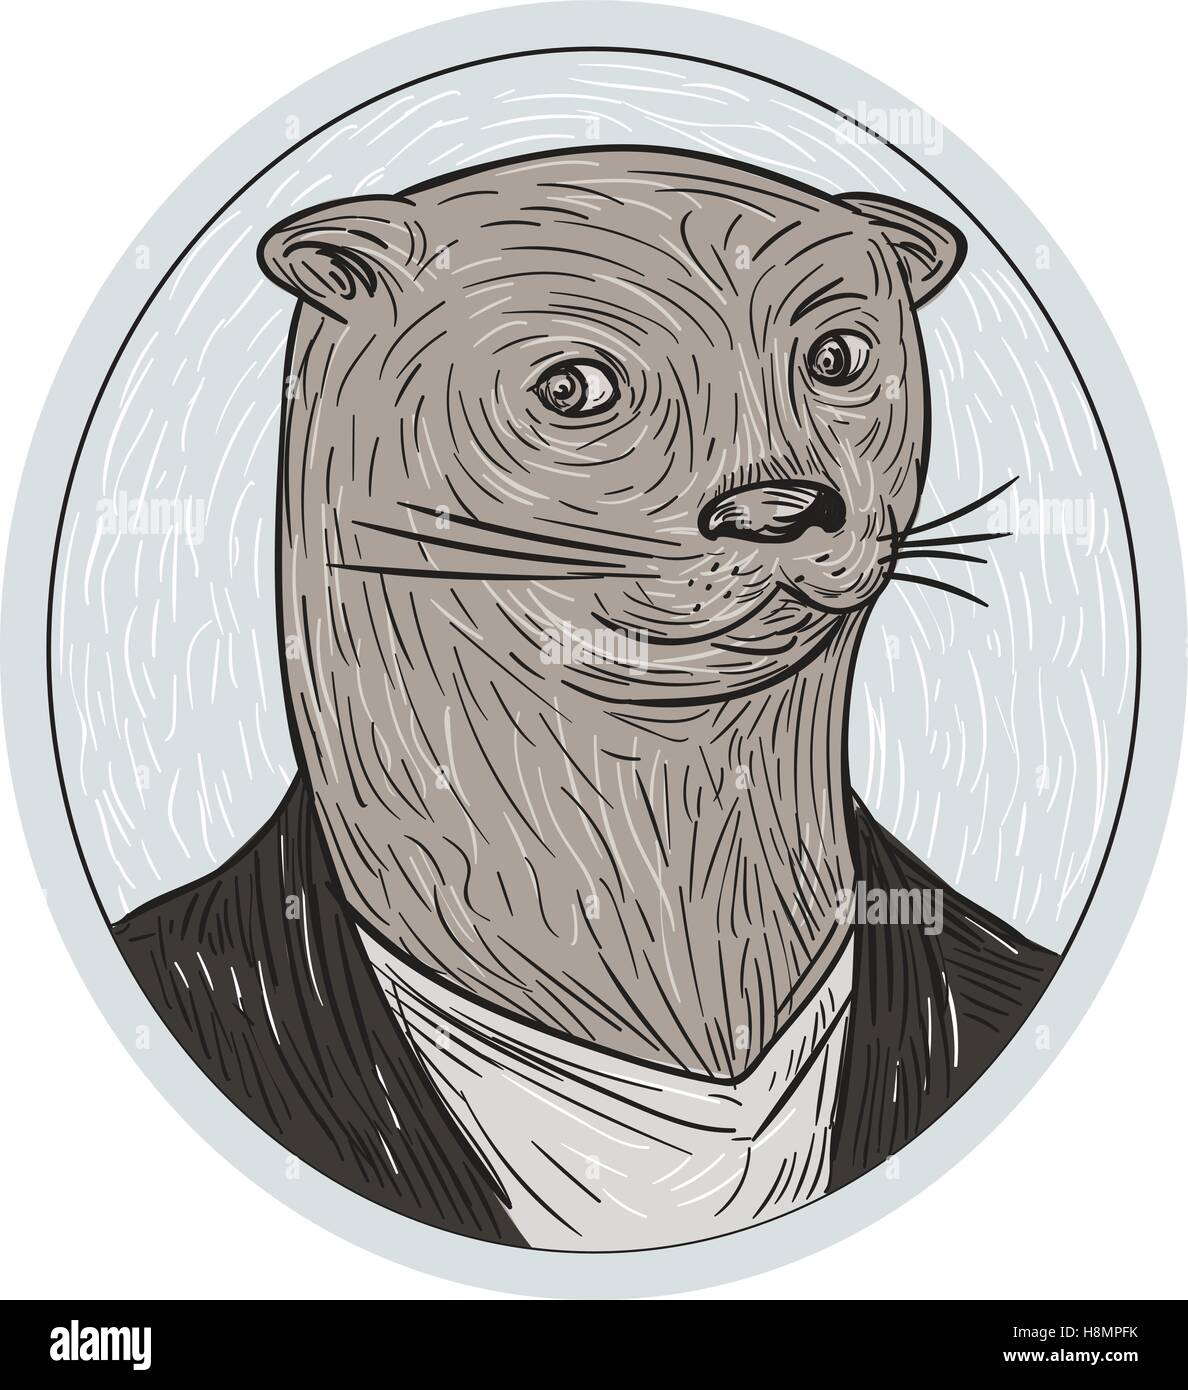 Drawing sketch style illustration of an otter head wearing shirt and blazer facing front set inside oval shape. Stock Vector